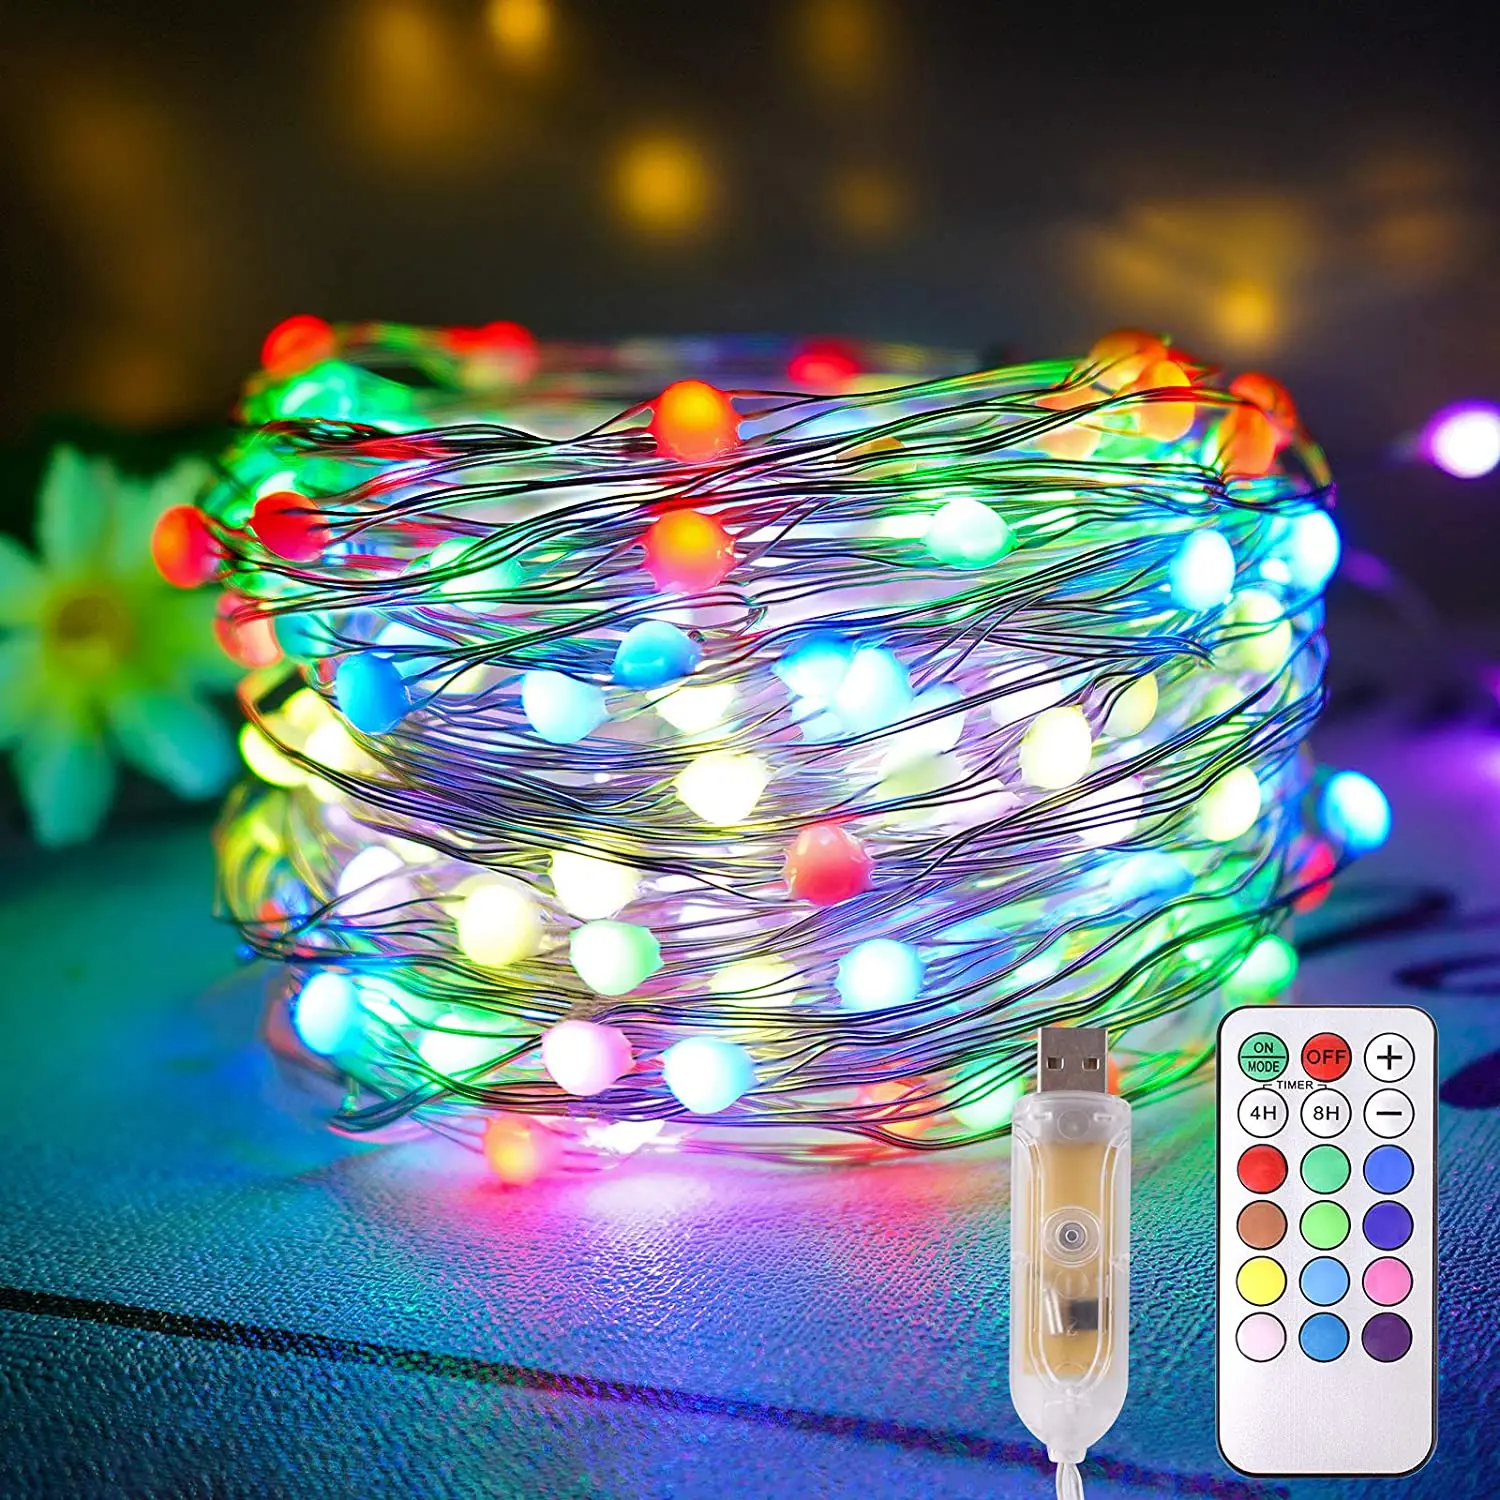 10m 100led Fairy Lights Christmas Tree Decoration 5v Usb Power Flexible  Garland Waterproof Led String Lights With Remote Control - Lighting Strings  - AliExpress